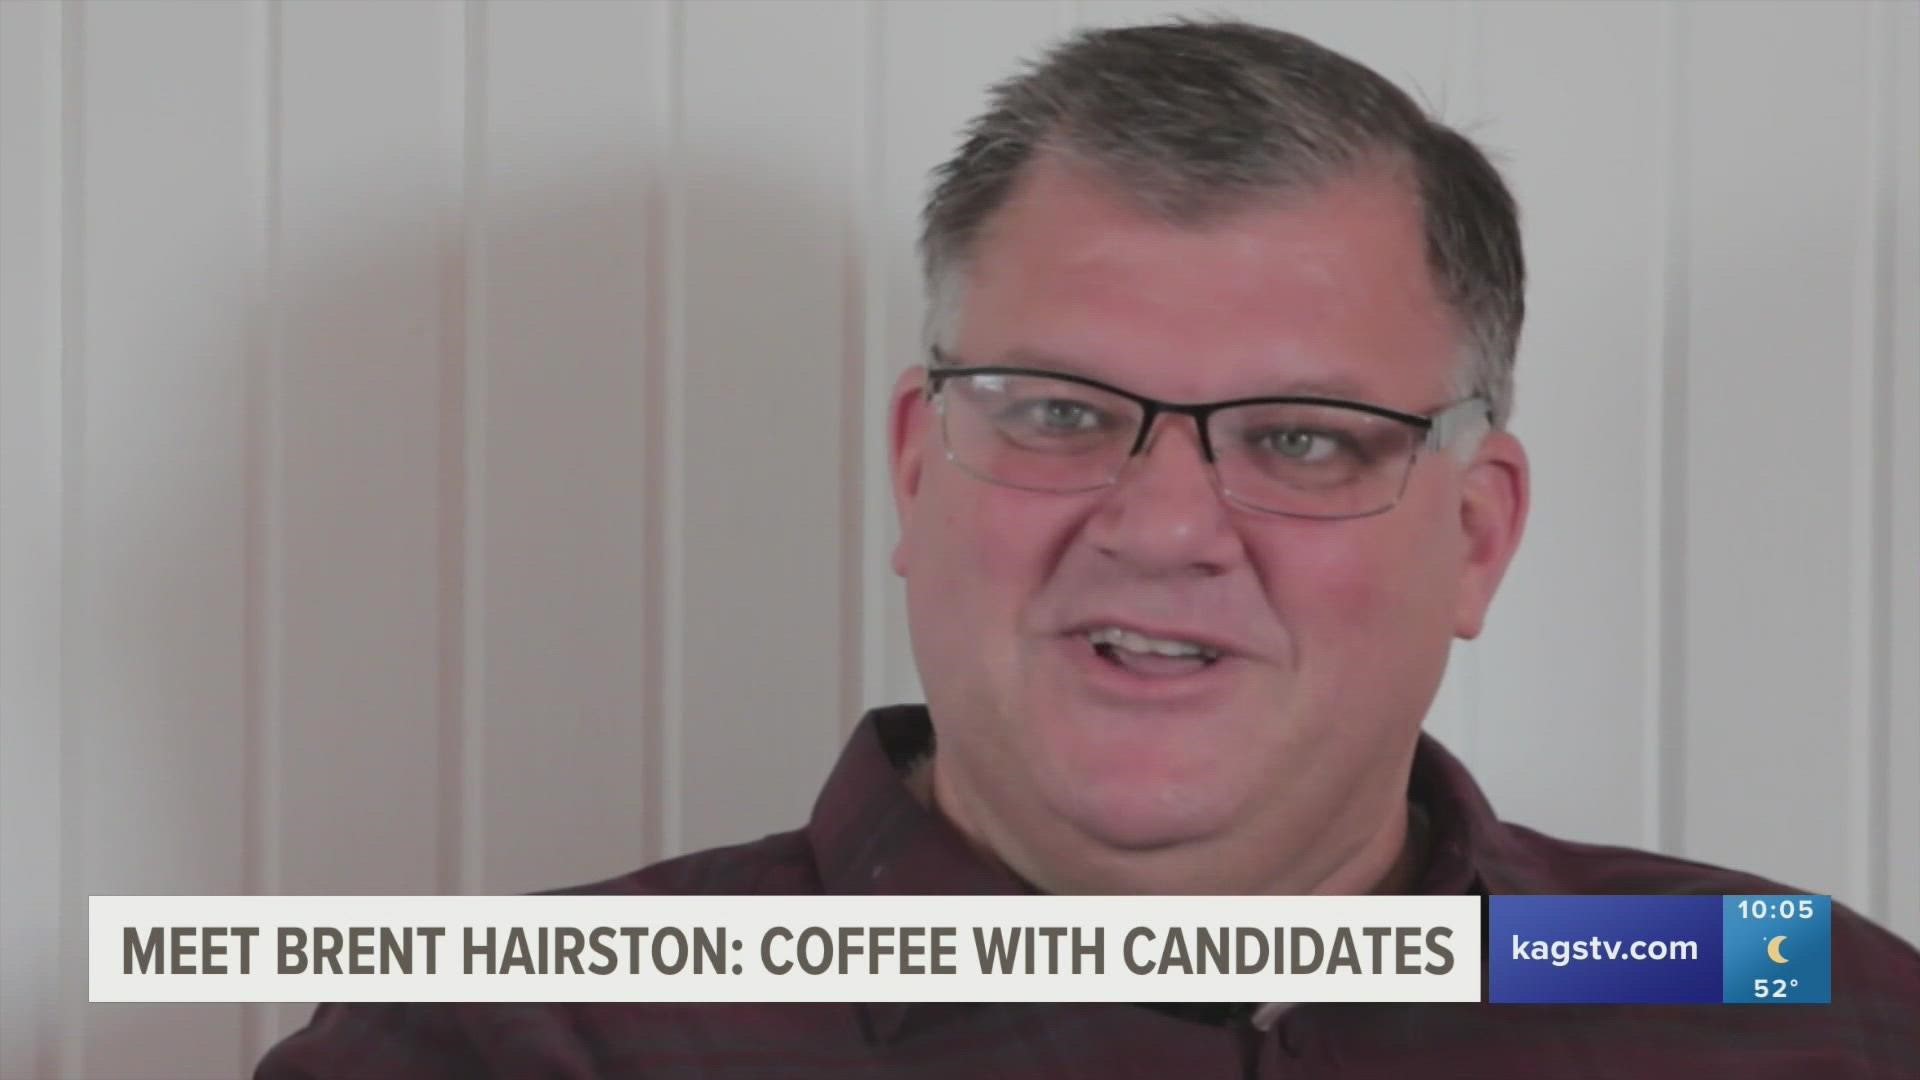 Brent Hairston, who has lived in Bryan-College Station since 1986, has decided to run for the Mayor of Bryan after multiple years on the city council.